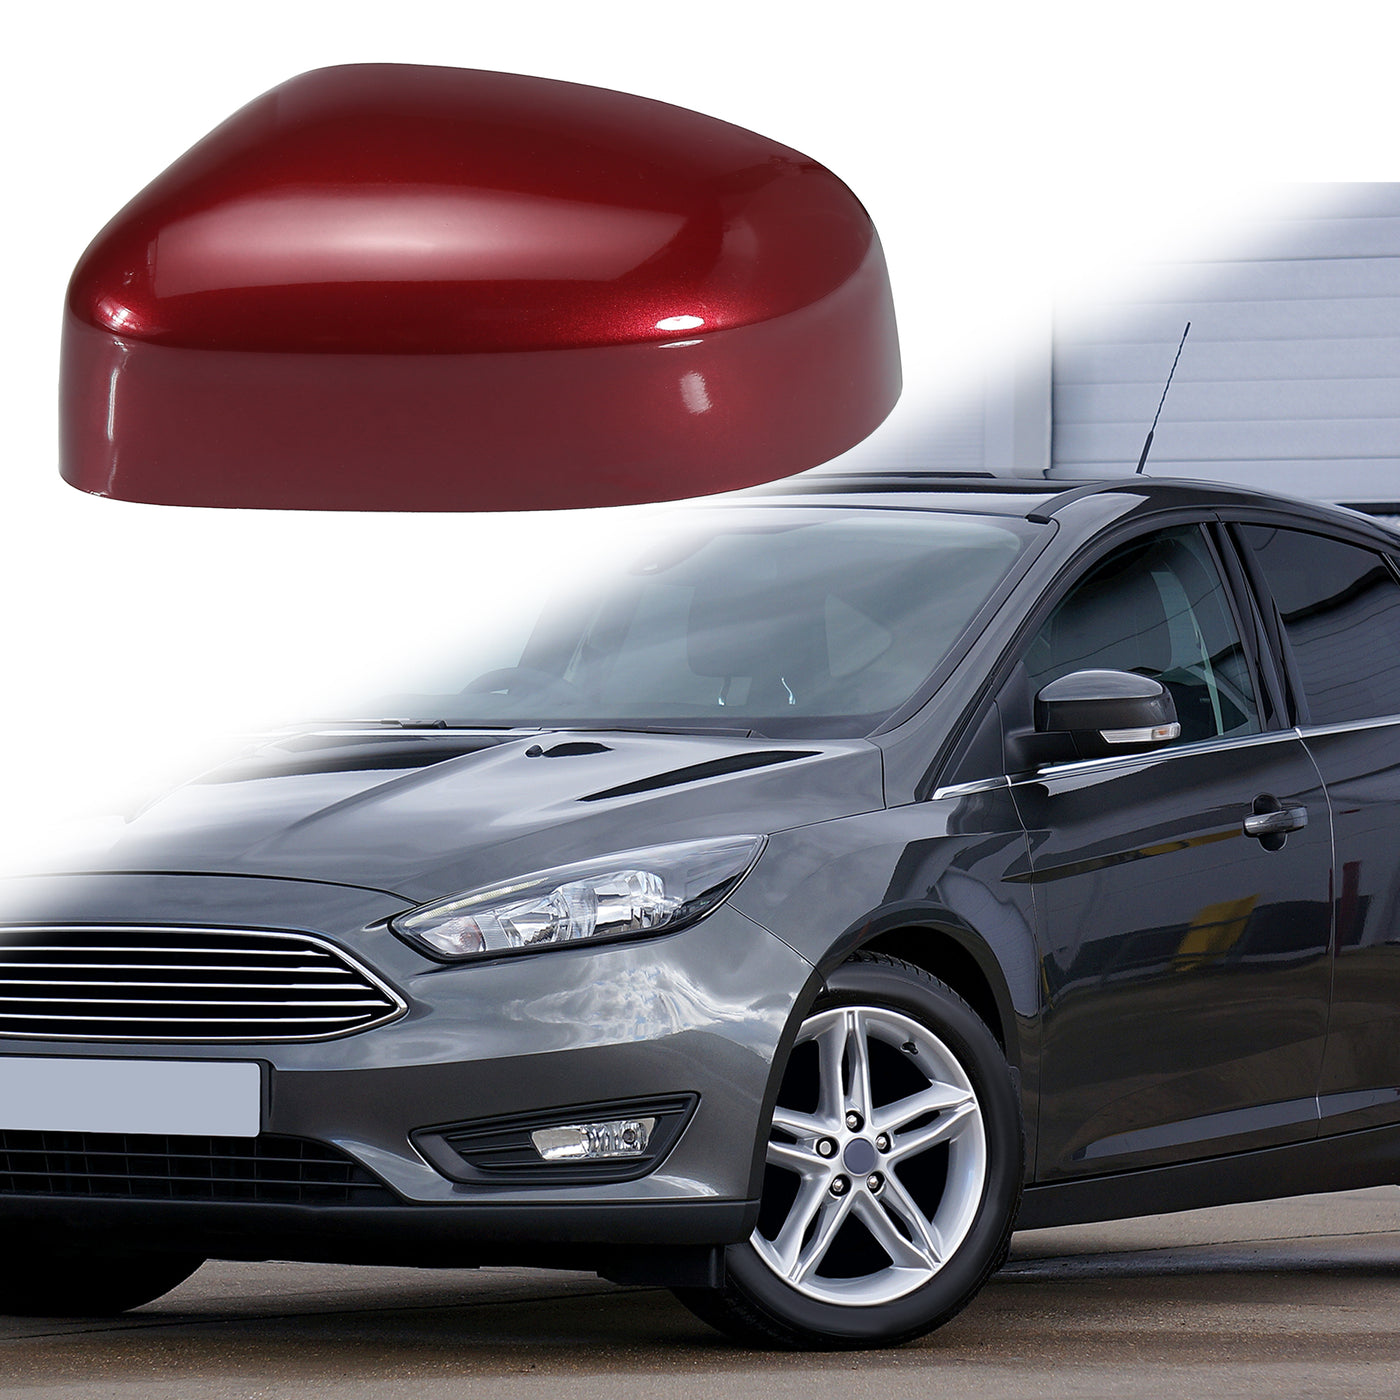 X AUTOHAUX Red Left Side Car Side Door Wing Mirror Cover Rear View Mirror Cap for Ford Focus MK2 Facelift 2008-2011 for Ford Focus MK3 2012-2017